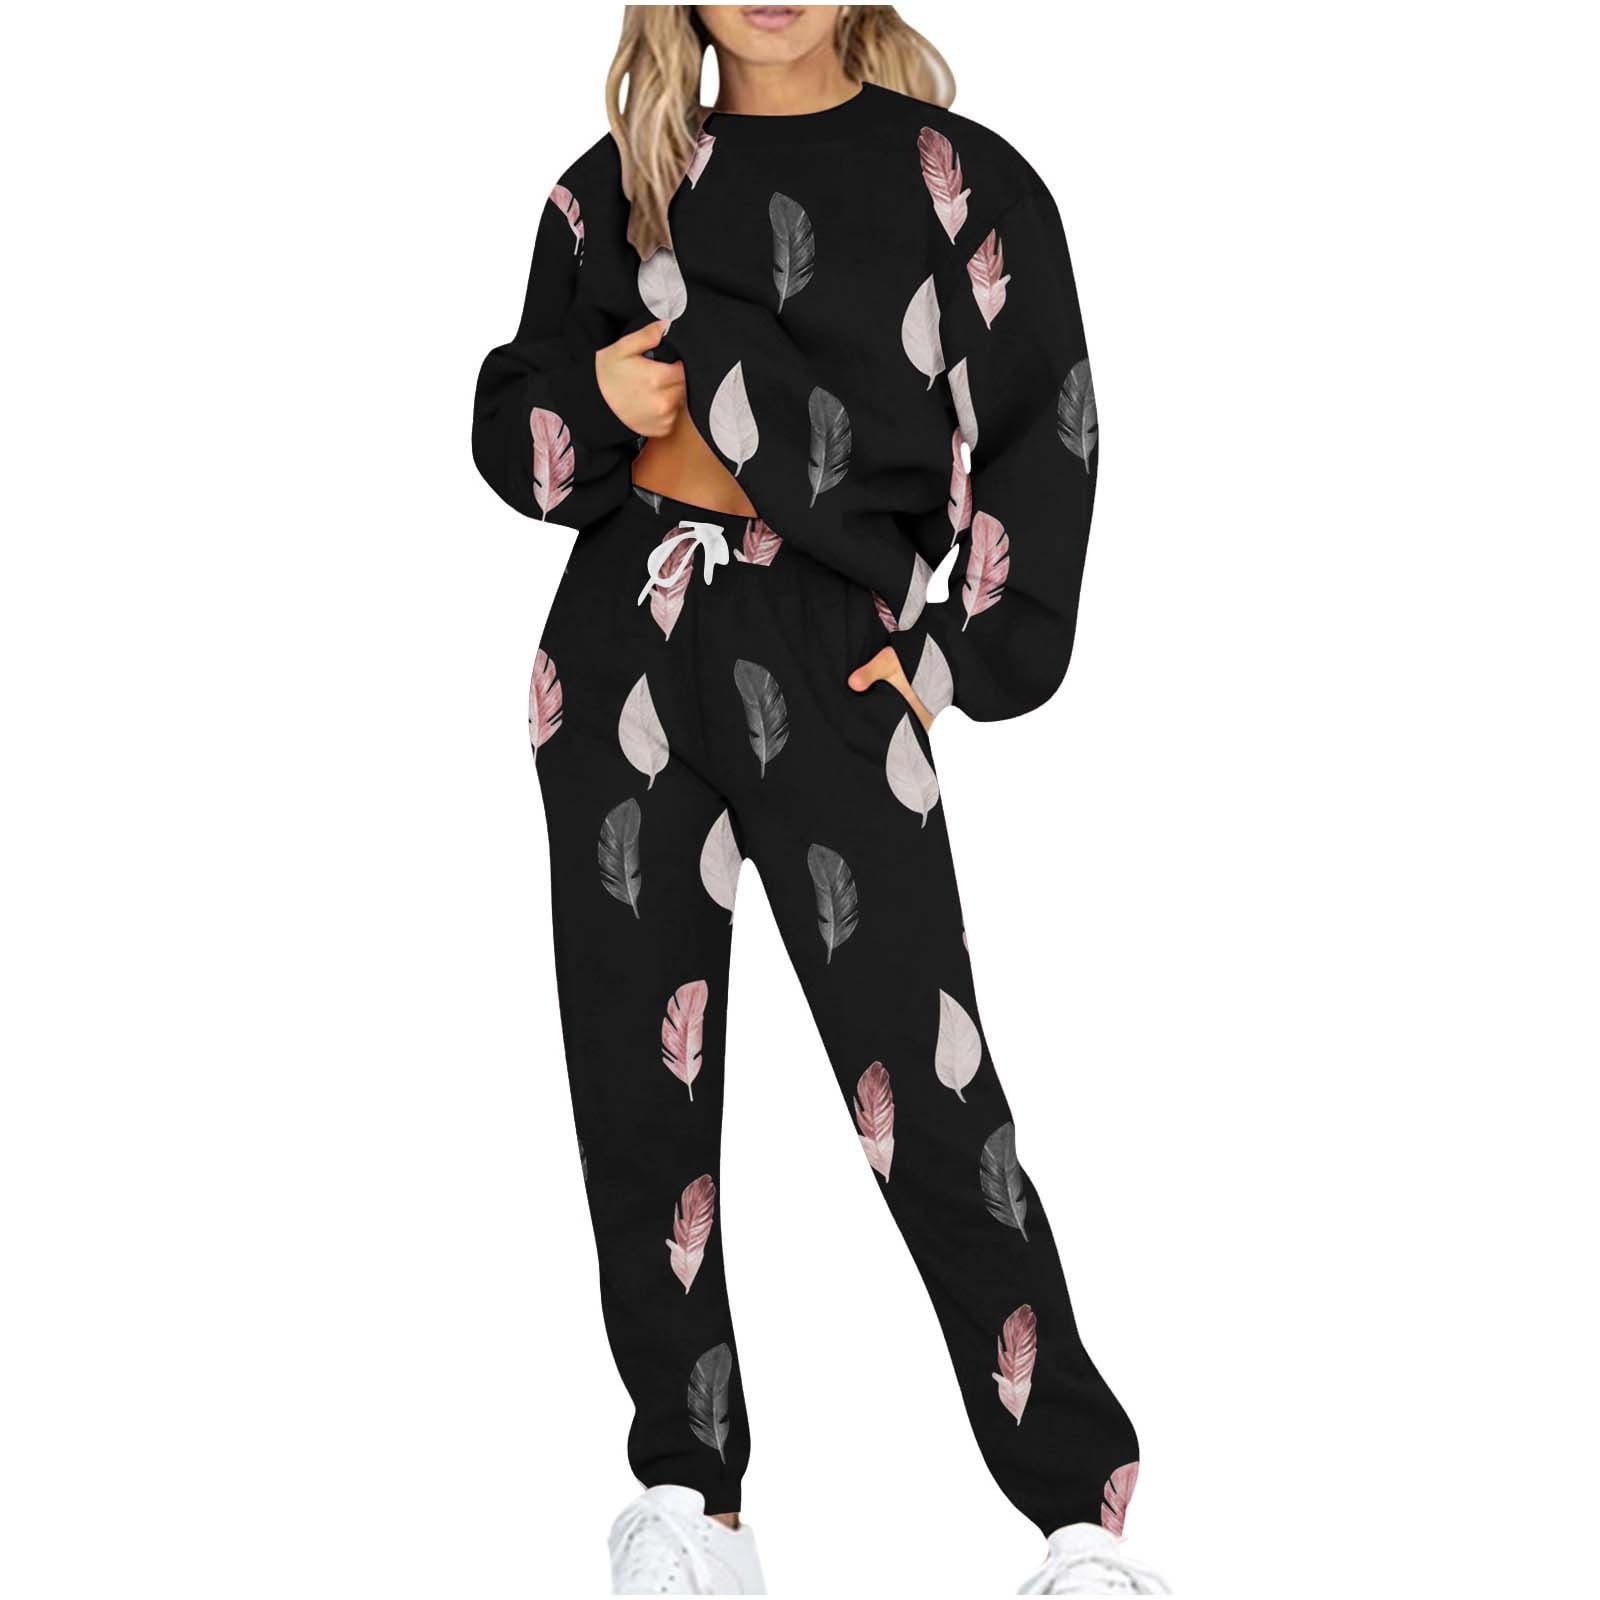 RQYYD Women's Jogging Suits Sets Hoodies Tracksuit Long Sleeve Drawstring  Sweatshirts and Sweatpant 2 Piece Color Block Sport Pullover Sweatsuit Pink  XL 